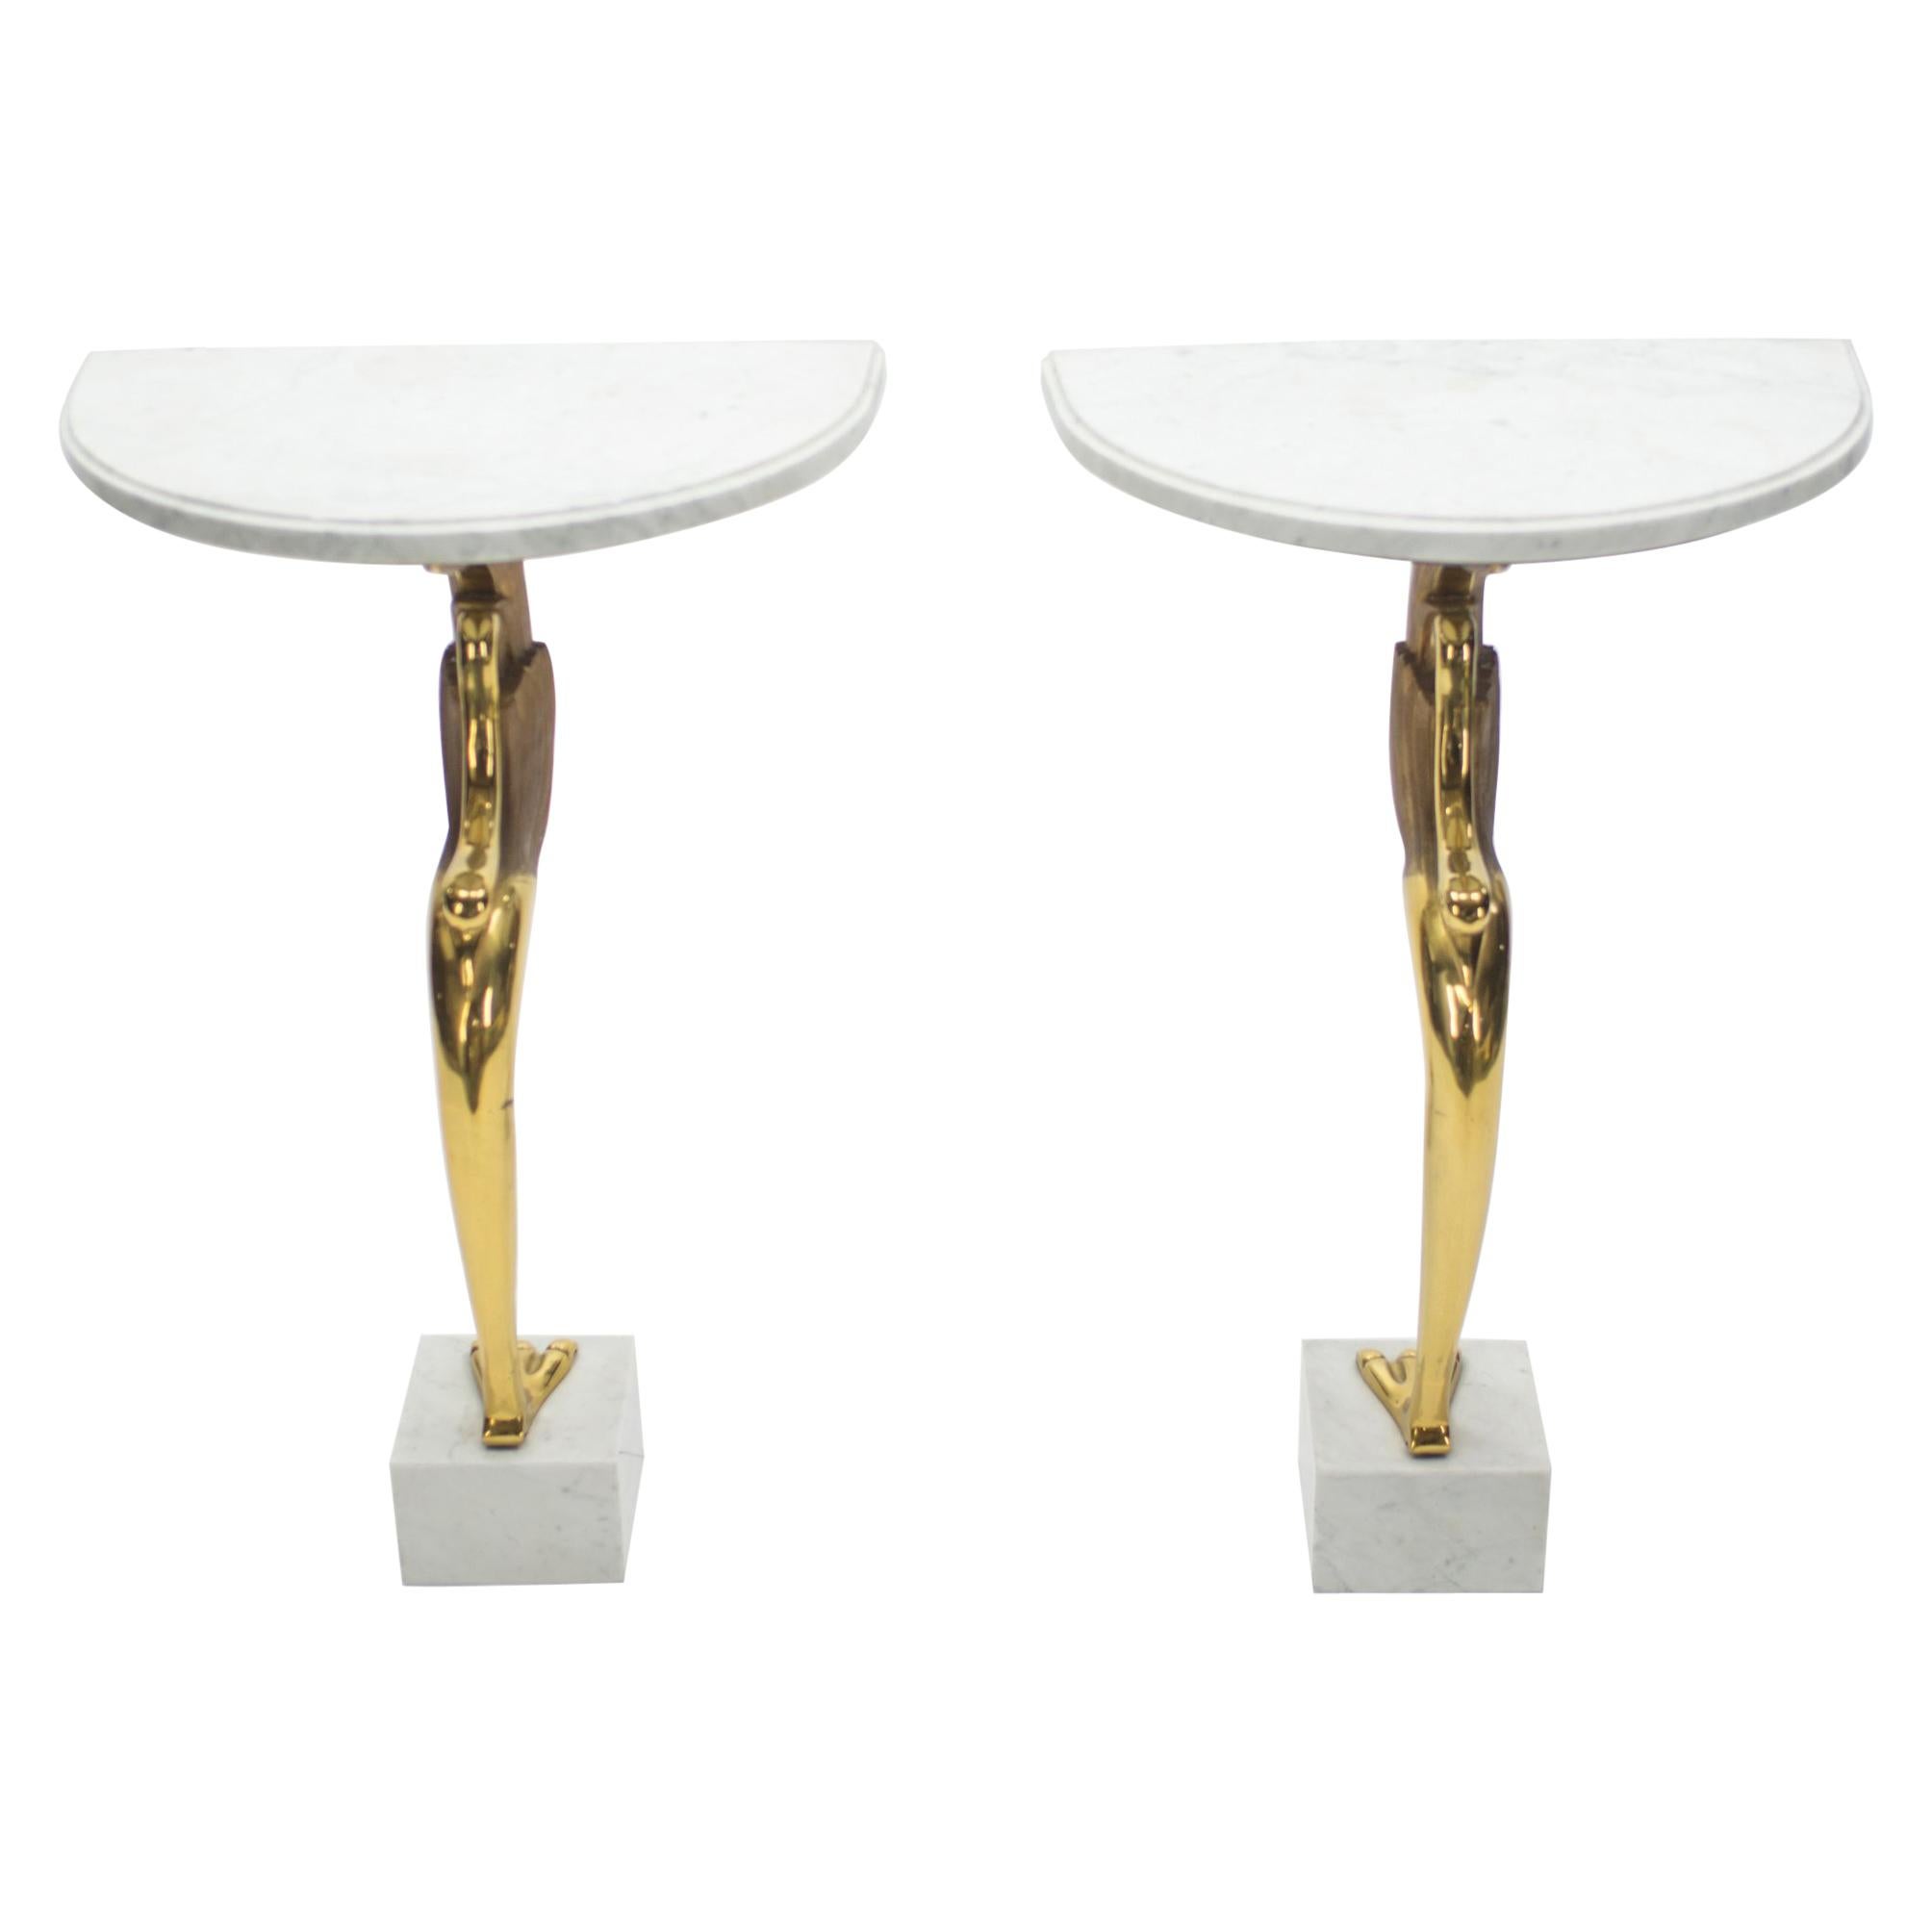 This pair of Mid-Century Modern console tables, made from bright, solid brass and white marble, were designed by Robert Thibier, for his own apartment and showroom located on Rue du Faubourg Saint Honoré in Paris. As you can see from the